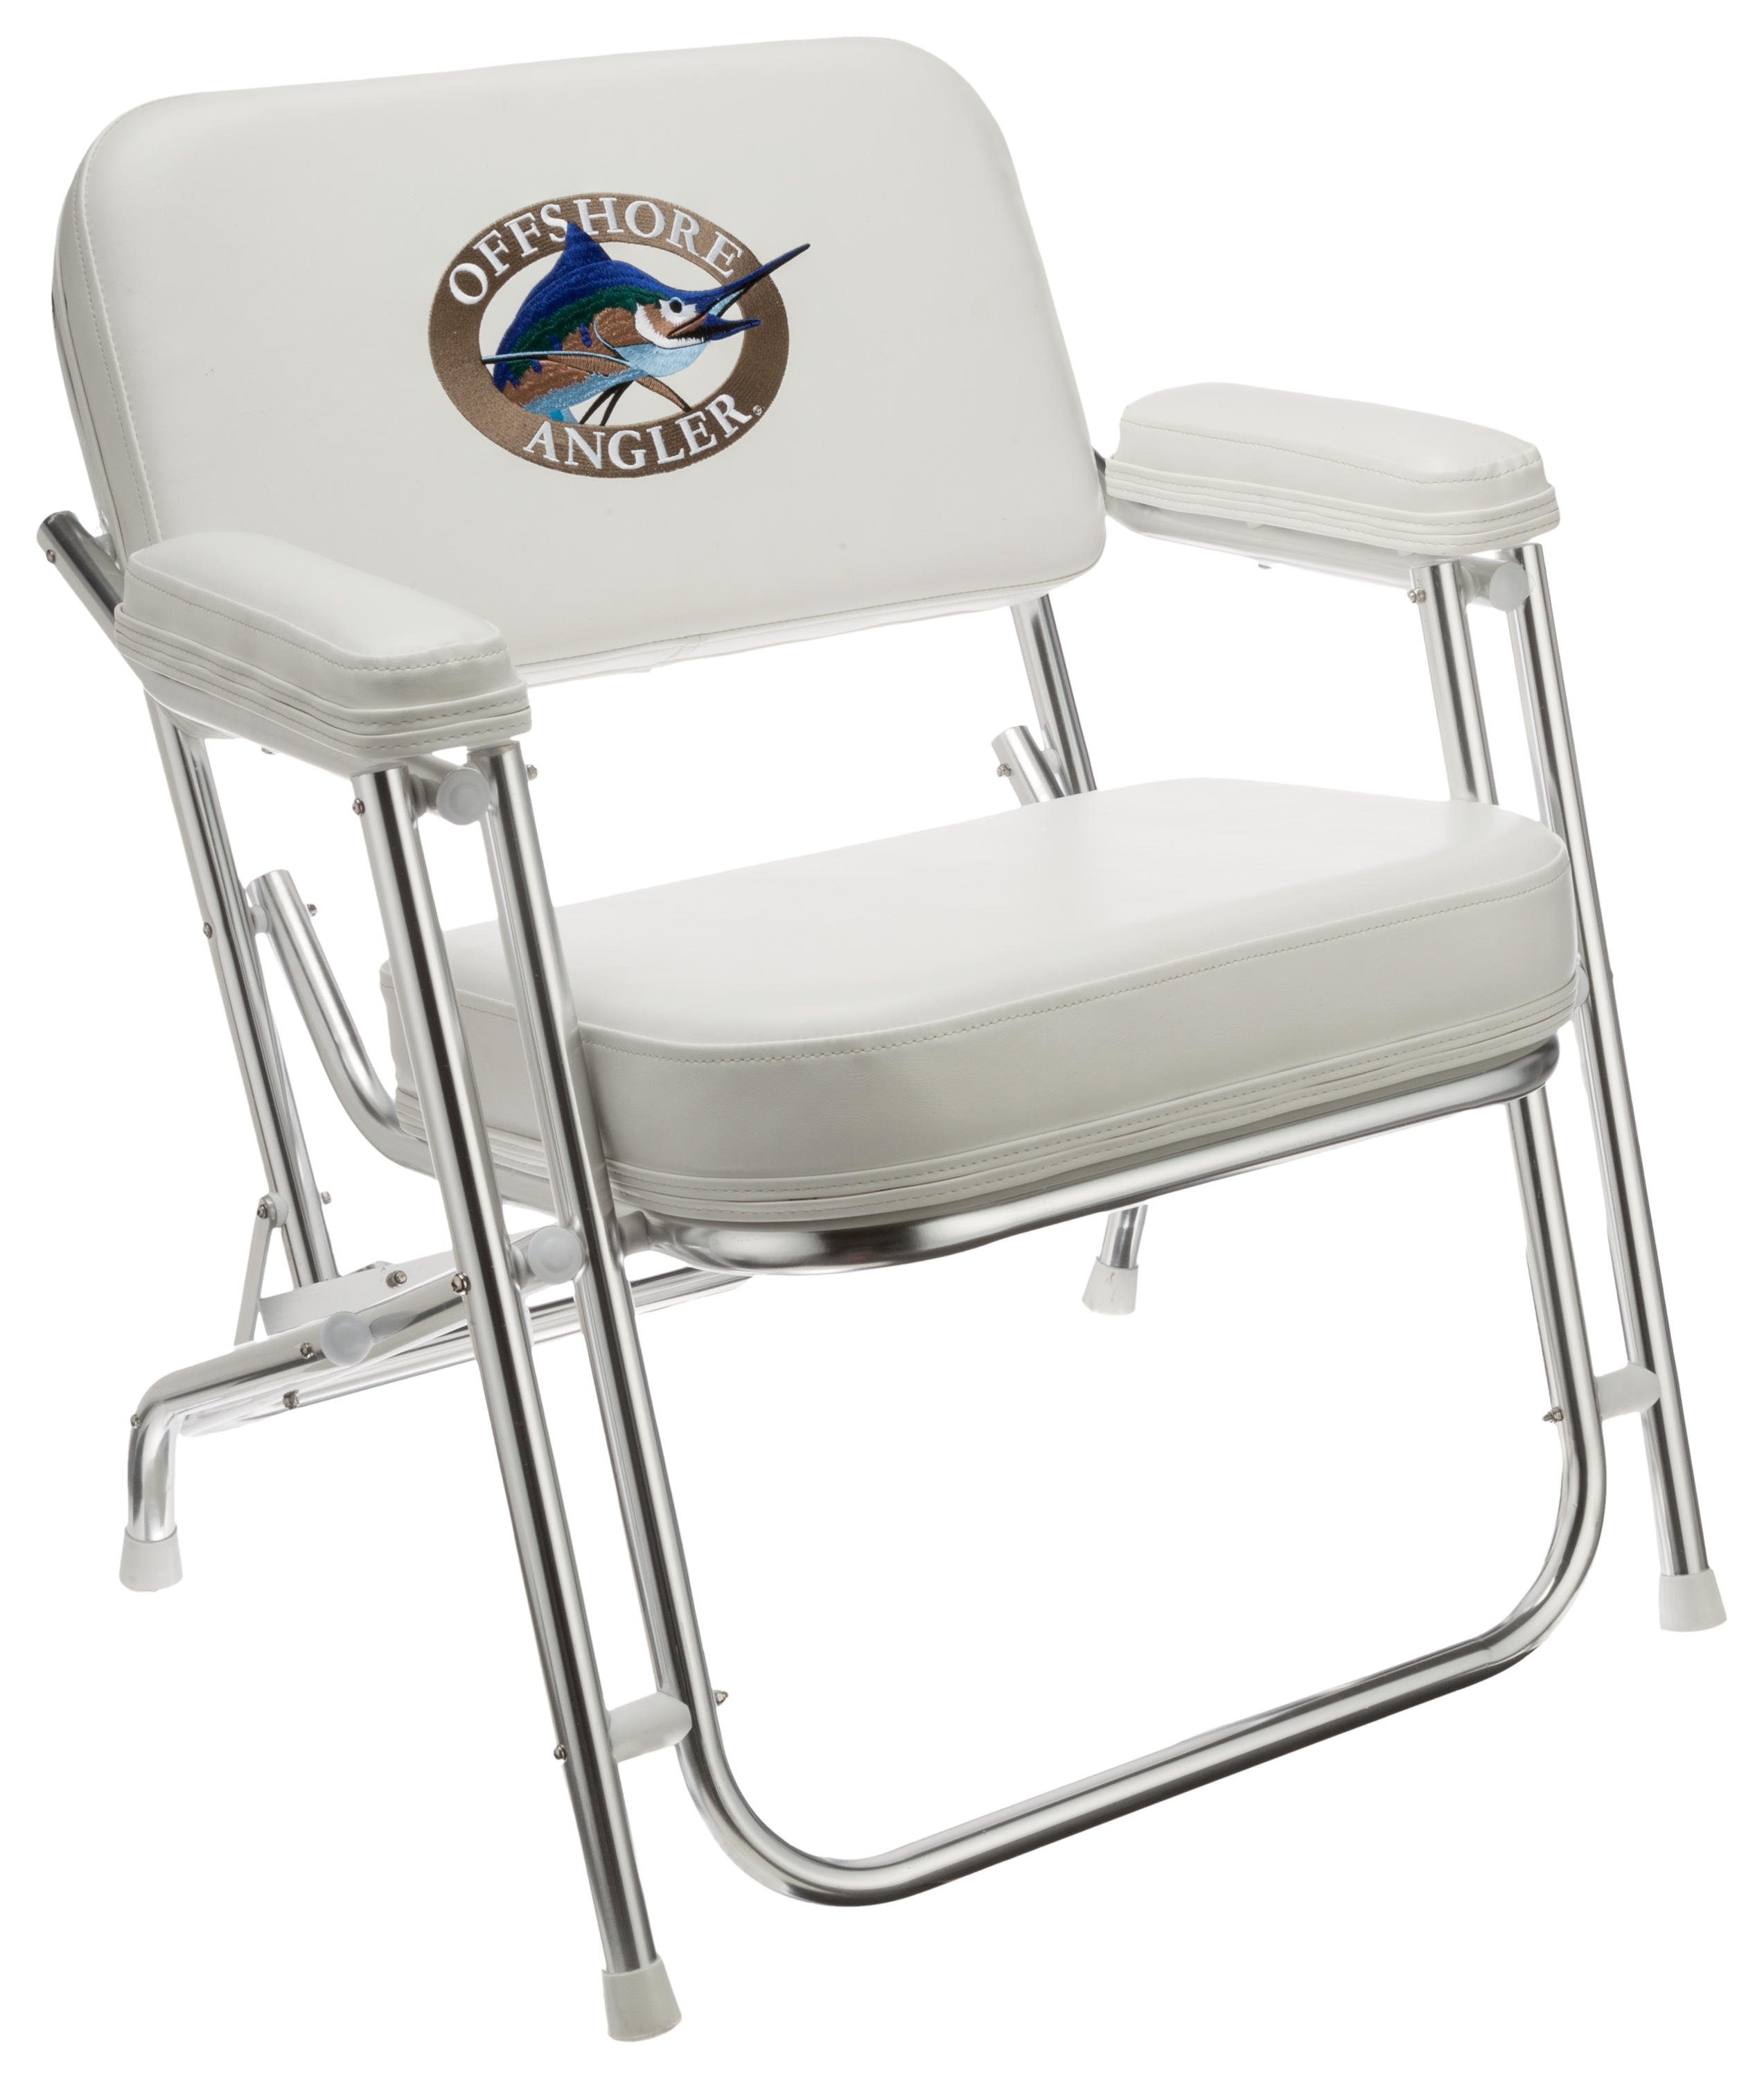 Fishing Chairs Folding with Rod Holder | Fishing Gifts for Men Open Box 